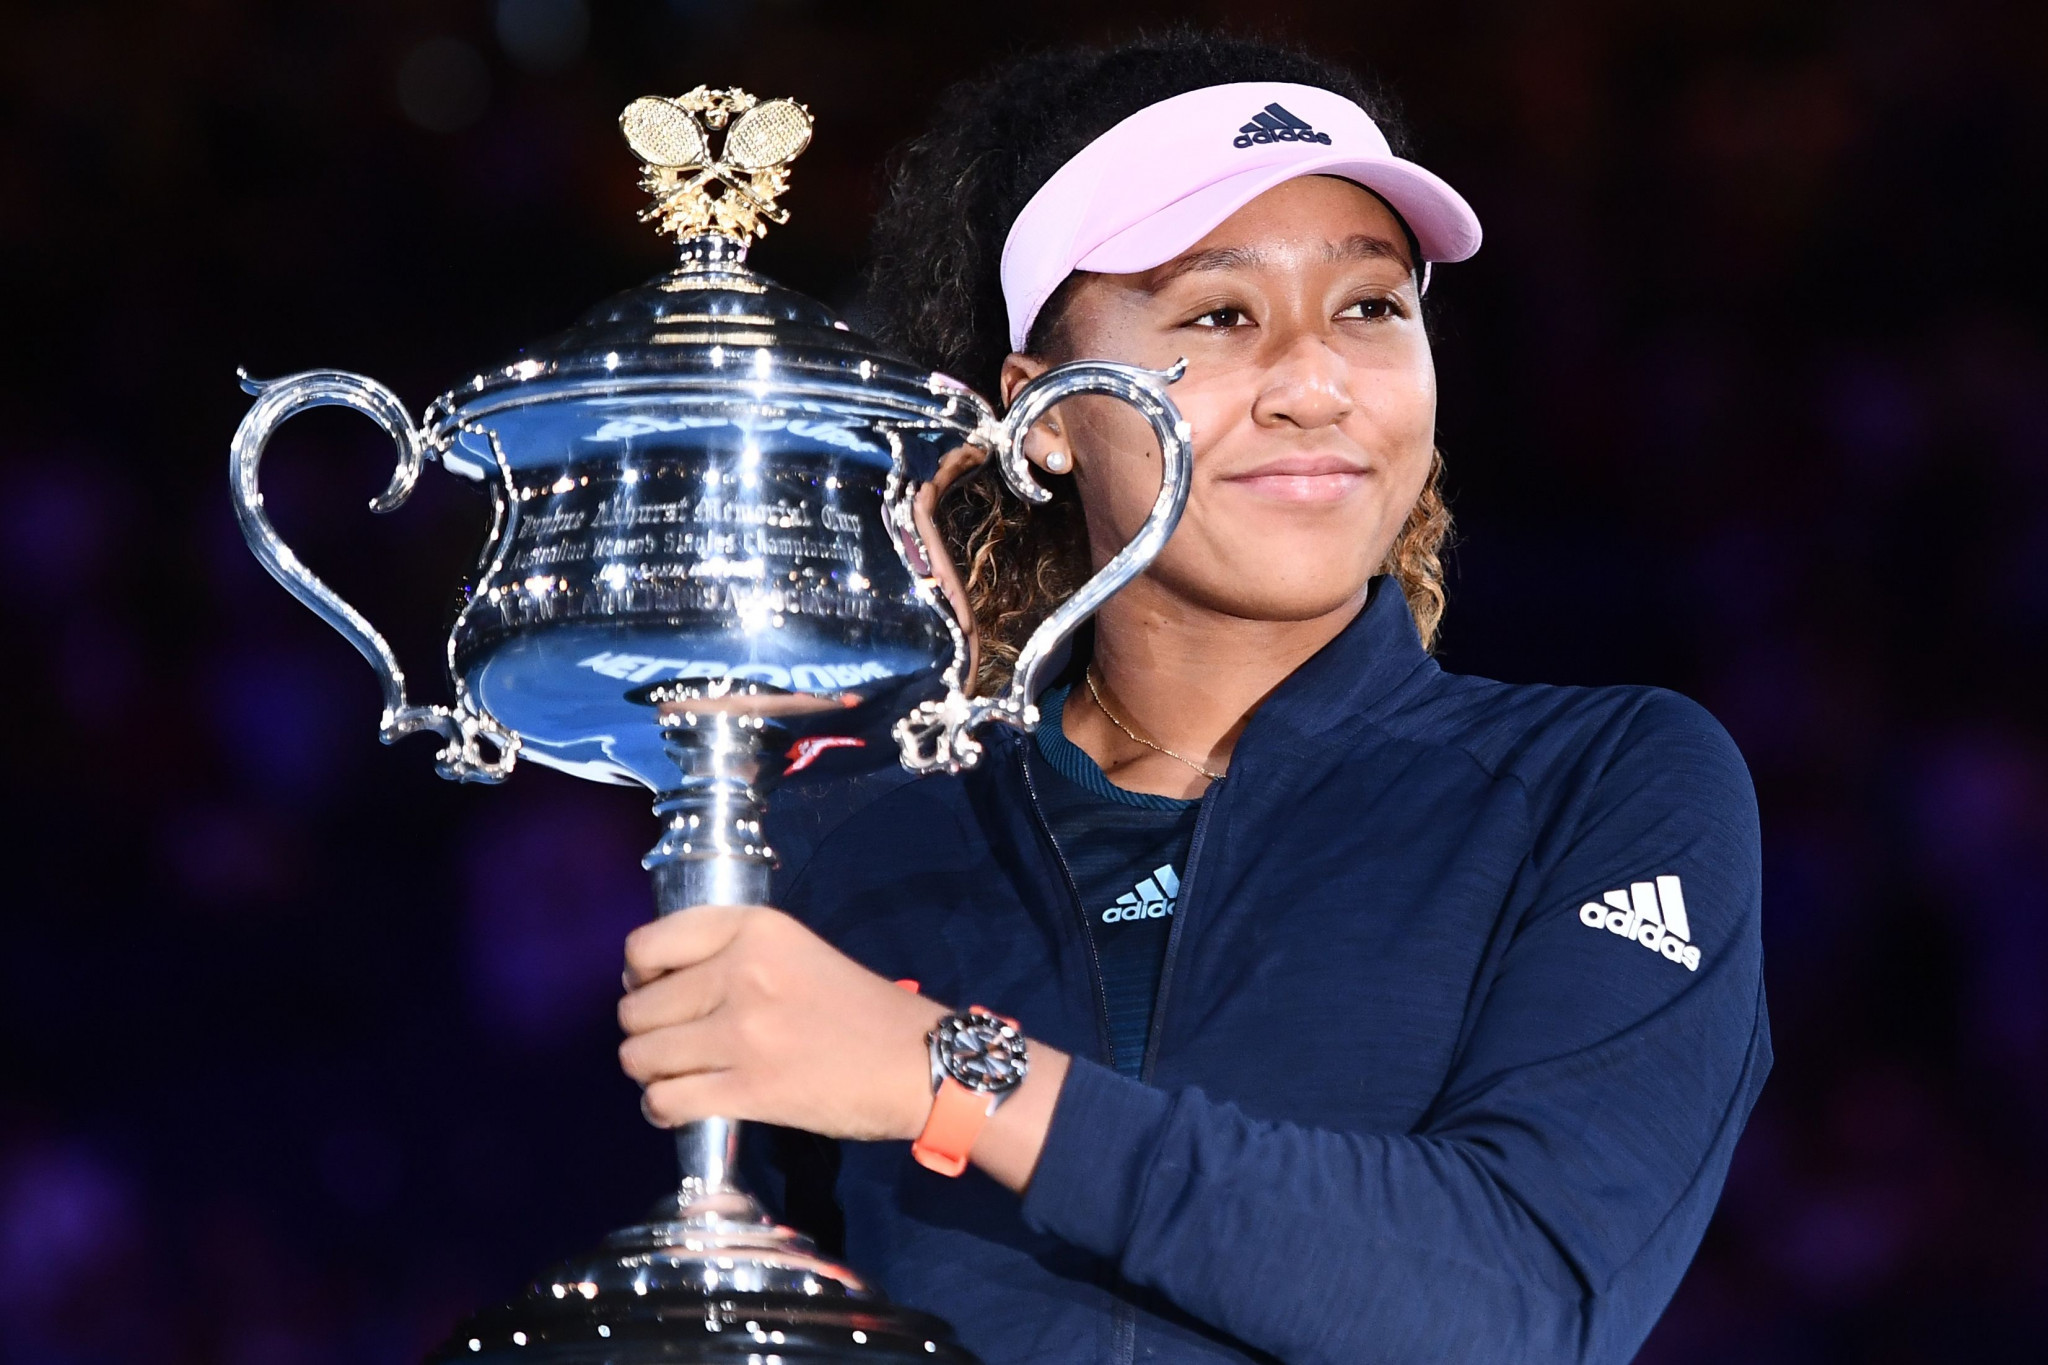 Naomi Osaka claimed back-to-back Grand Slam titles after winning the Australian Open final ©Getty Images